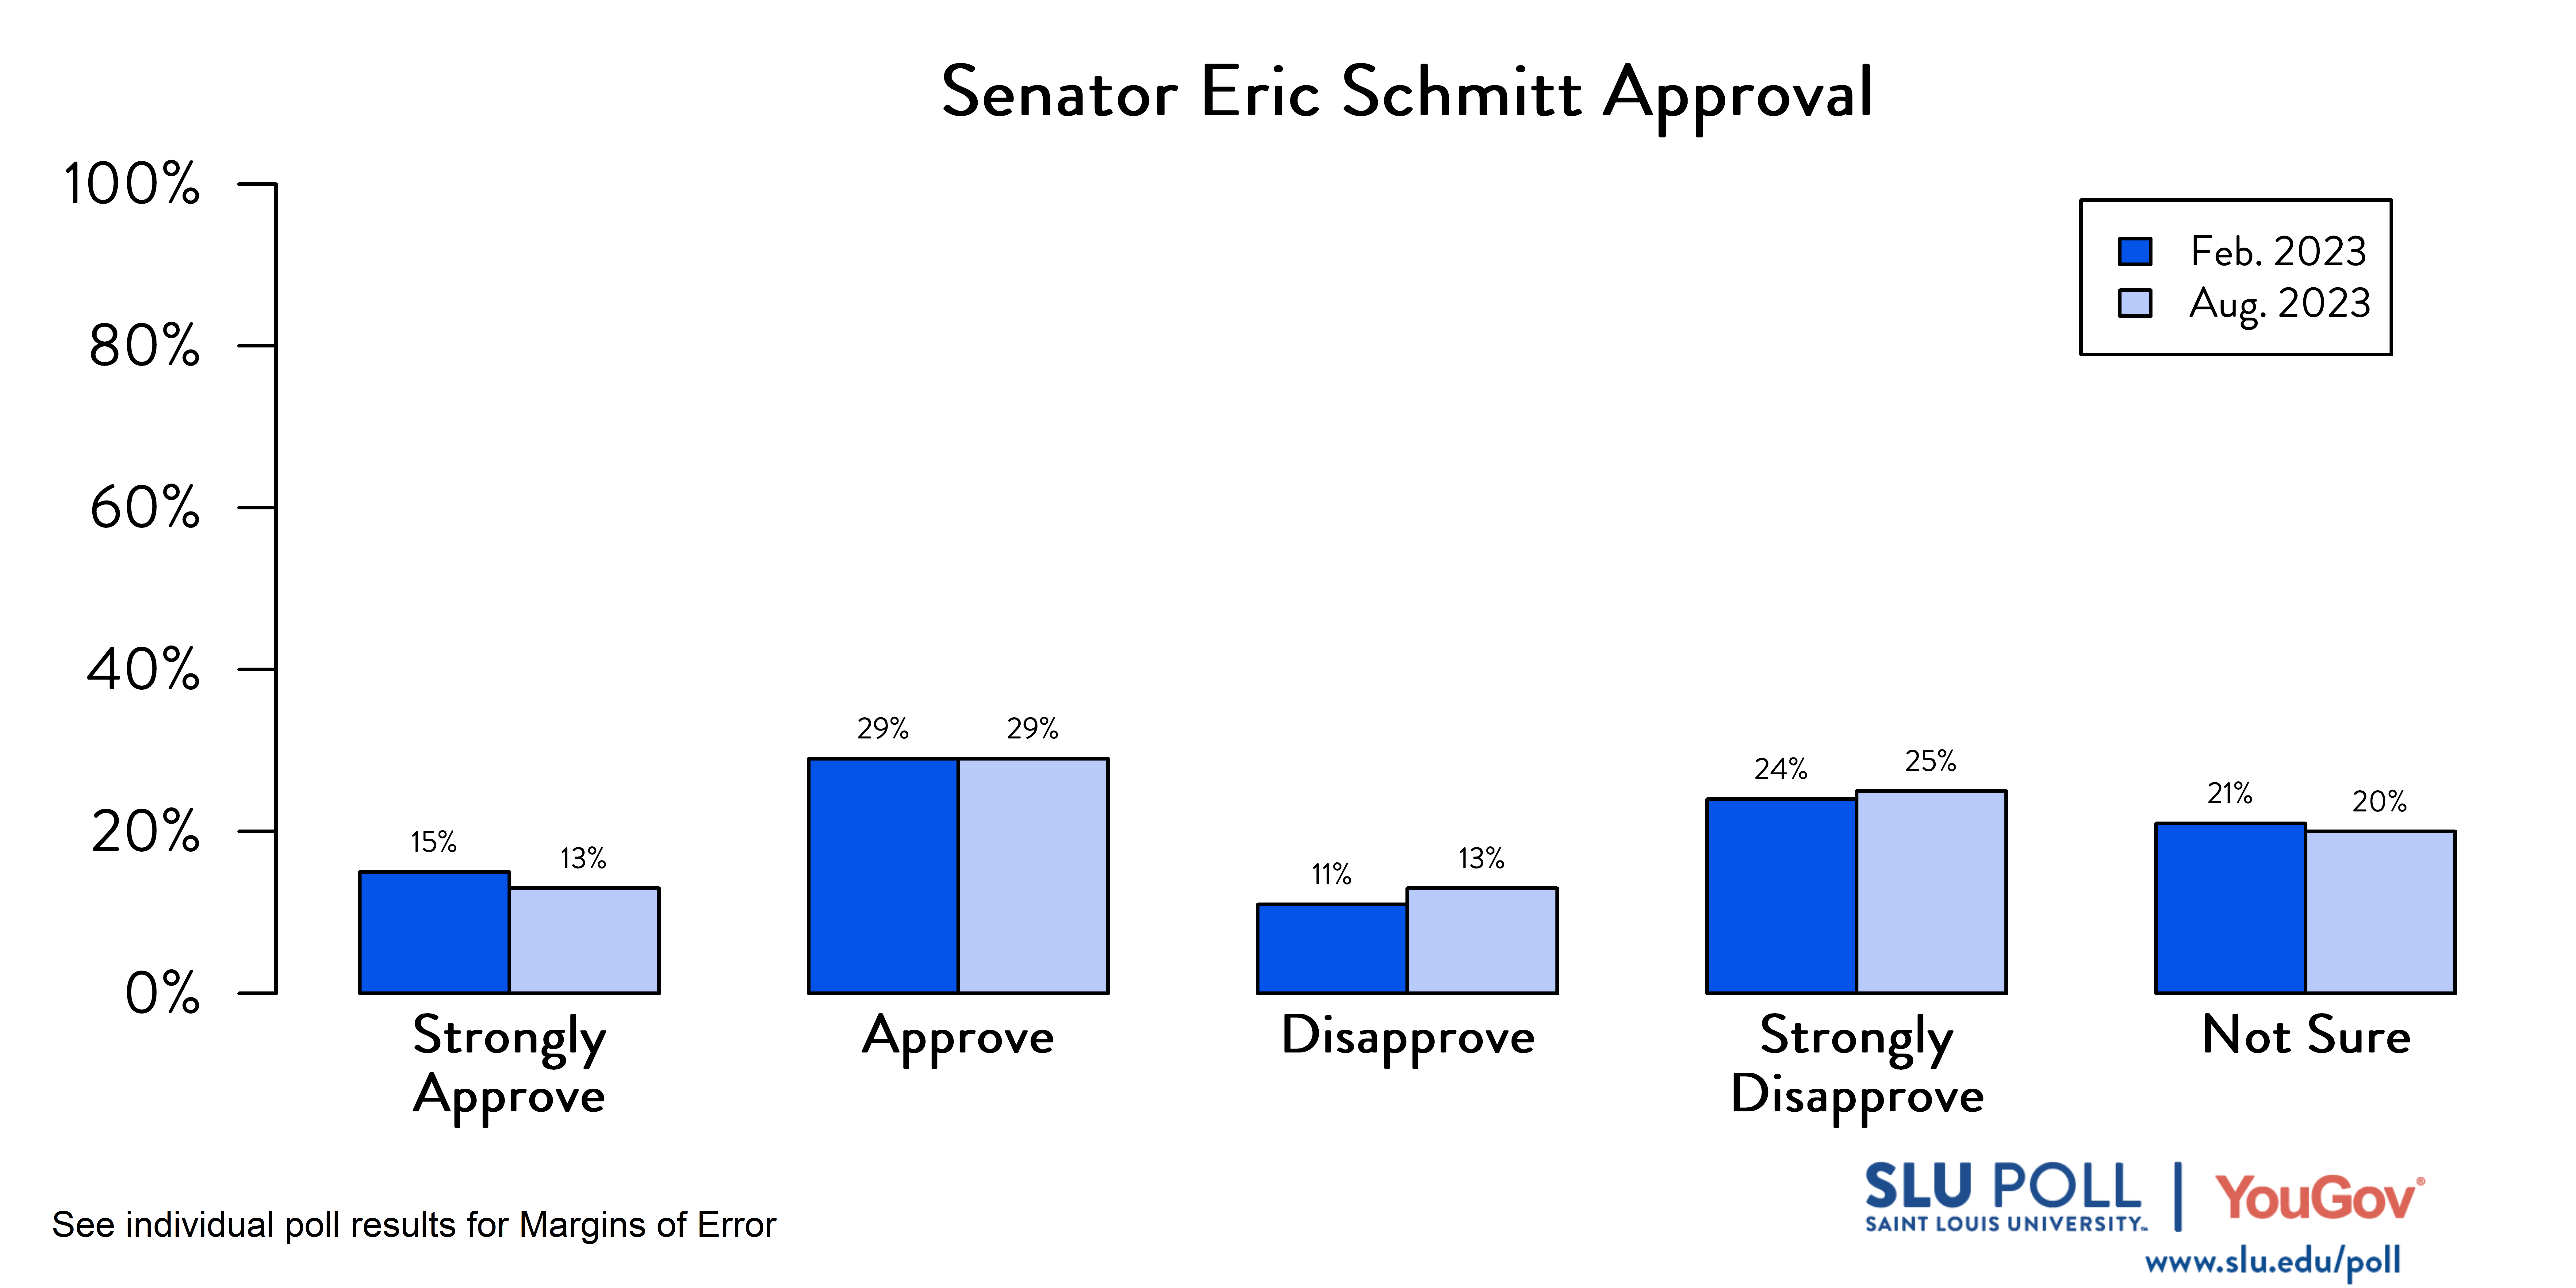 Likely voters' responses to 'Do you approve or disapprove of the way each is doing their job: Senator Eric Schmitt?'. February 2023 Voter Responses: 15% Strongly approve, 29% Approve, 11% Disapprove, 24% Strongly disapprove, and 21% Not sure. August 2023 Voter Responses: 13% Strongly approve, 29% Approve, 13% Disapprove, 25% Strongly disapprove, and 20% Not sure.